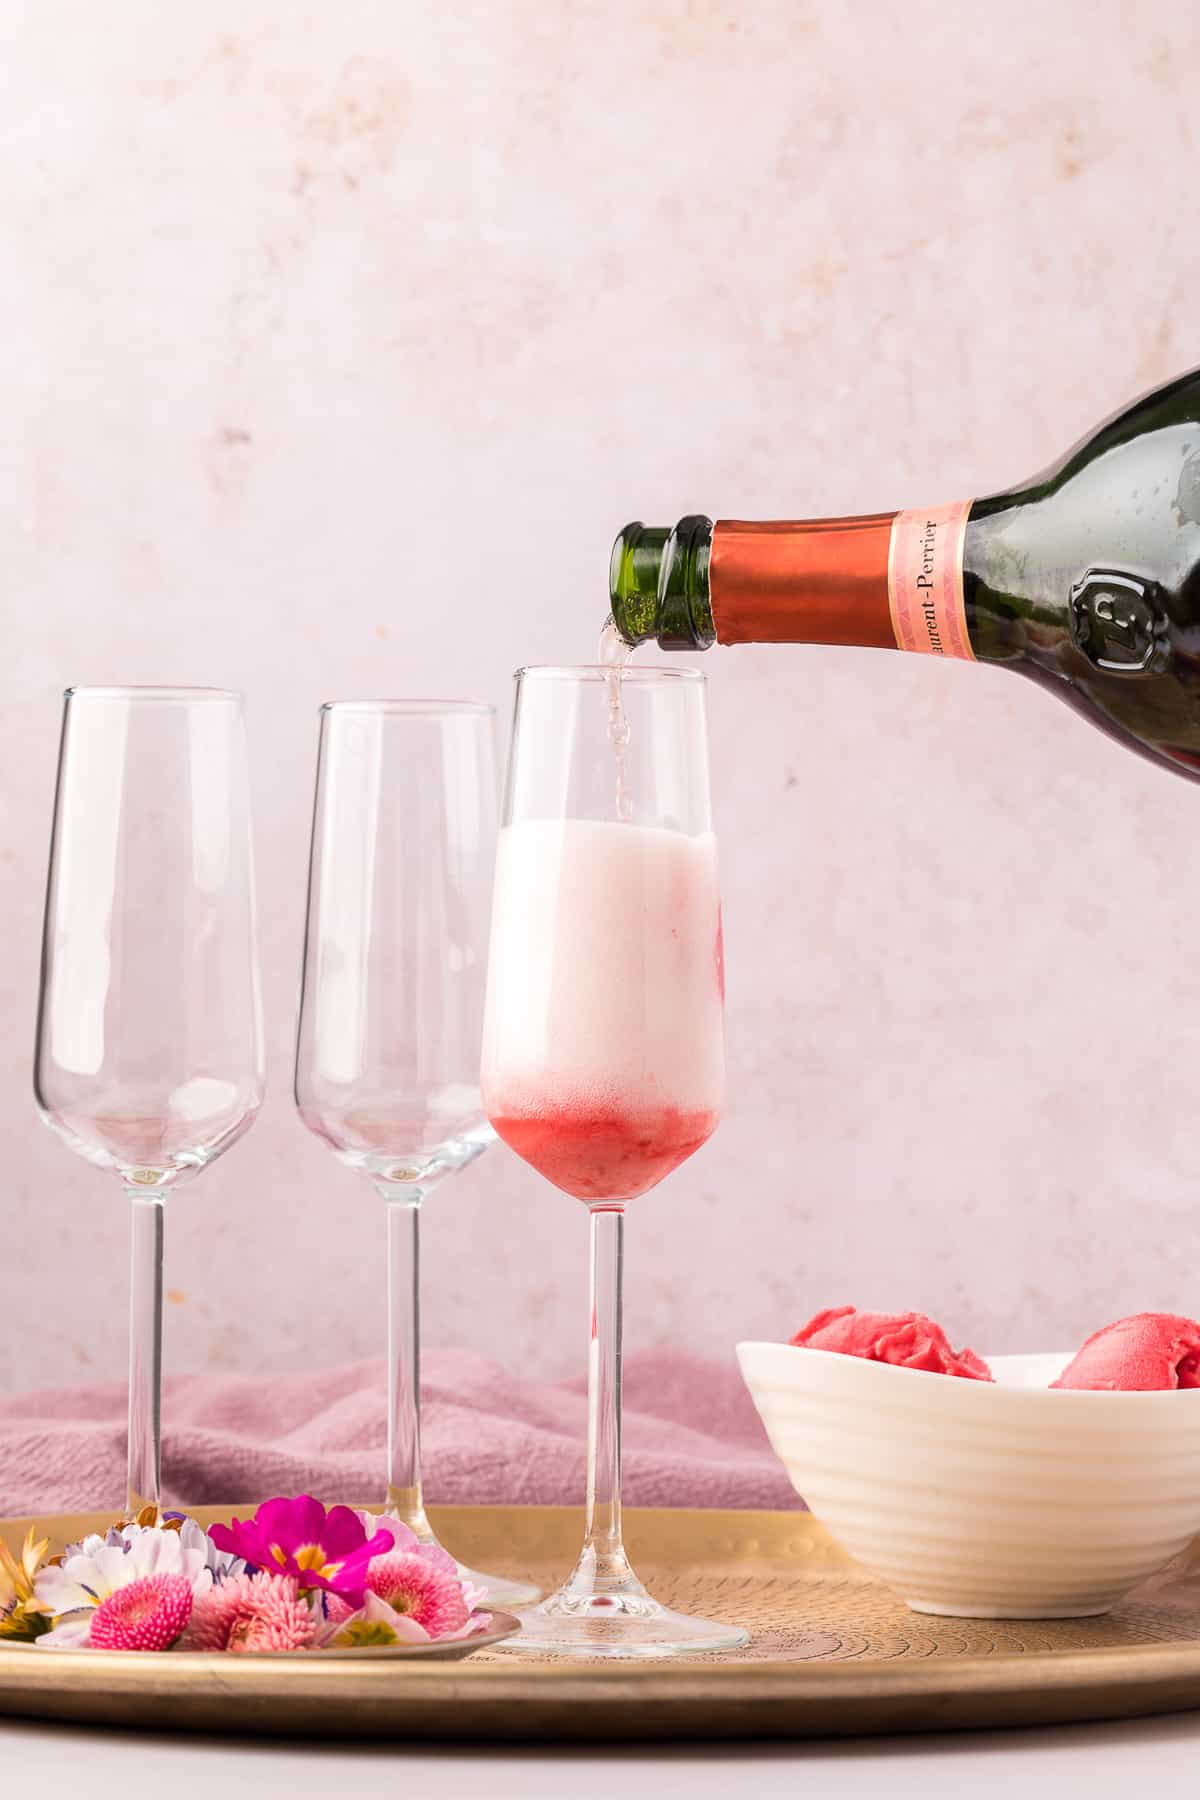 Champagne being poured into a glass with sorbet.